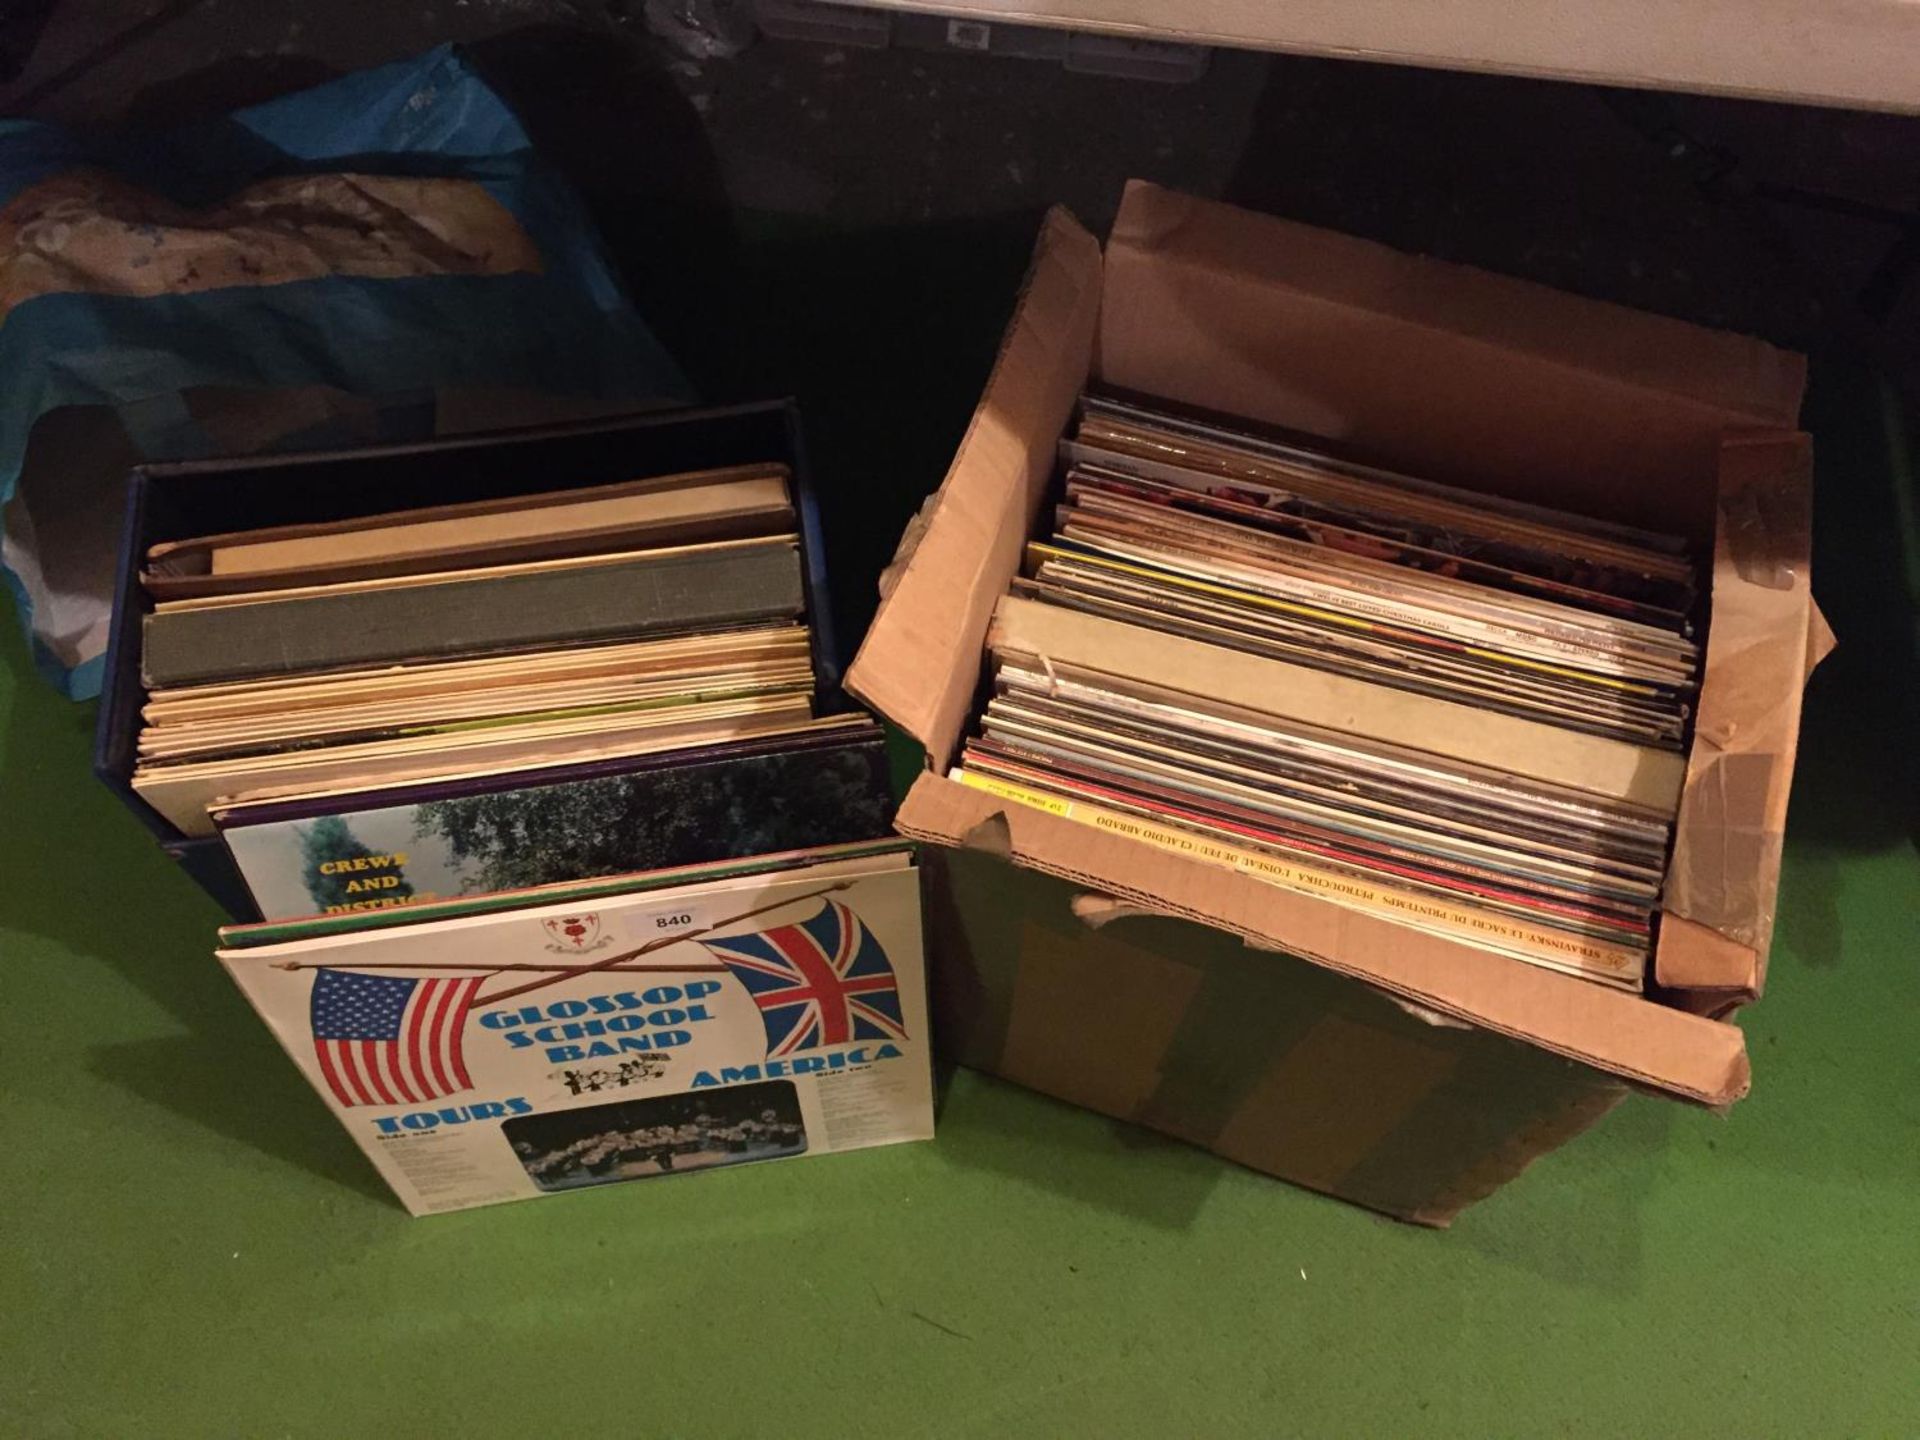 A LARGE BOX OF LP RECORDS AND A BLUE STORAGE BOX ALSO CONTAINING LP'S TO INCLUDE SINATRA, BING